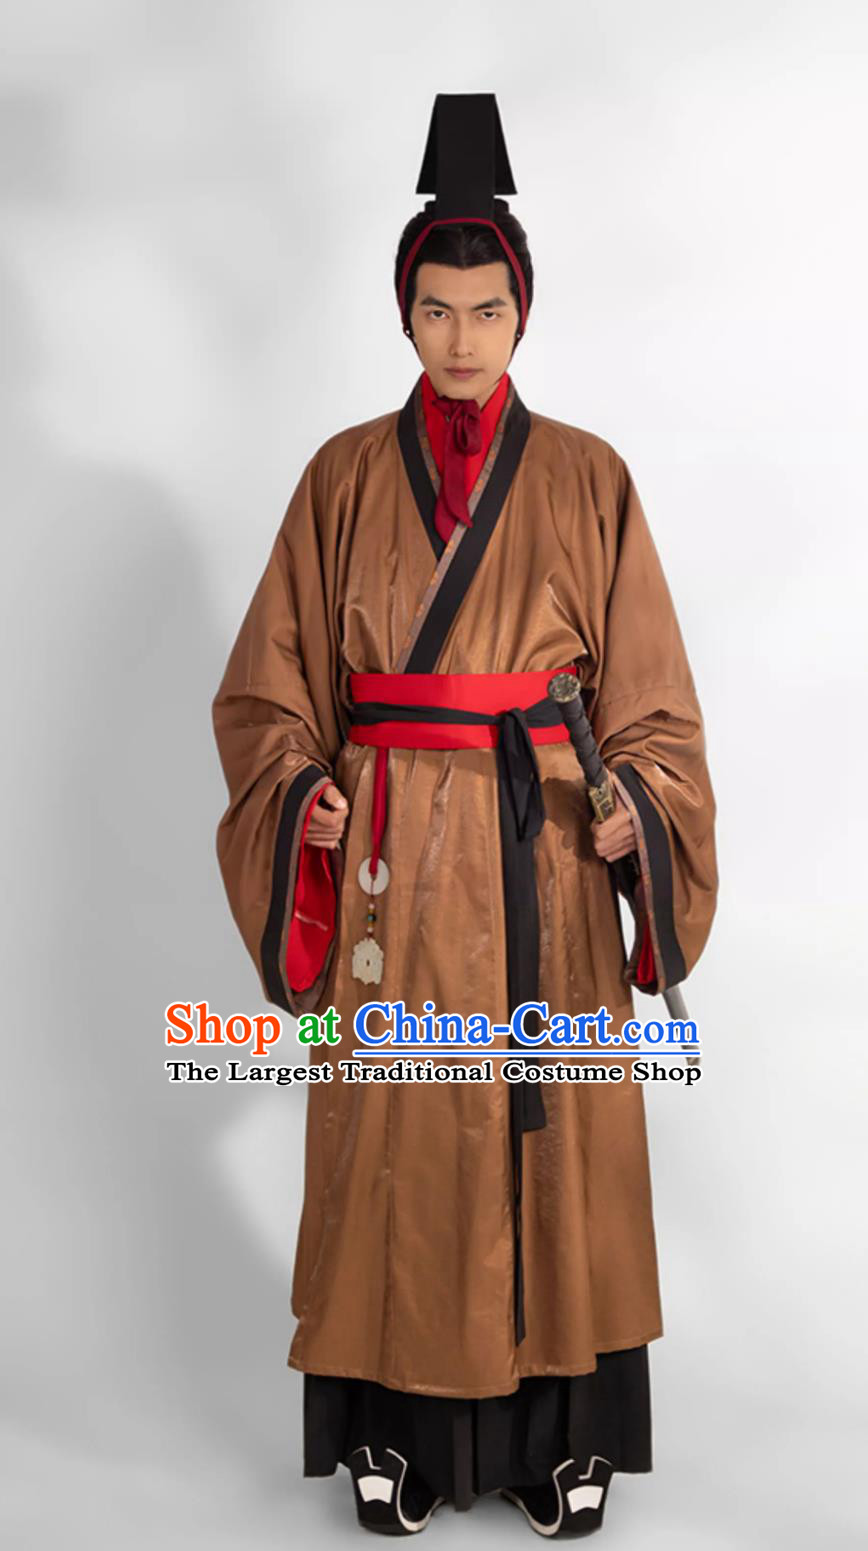 Men Hanfu Ancient Chinese Swordswoman Clothing Traditional Warring States Robe China Travel Photography Costume